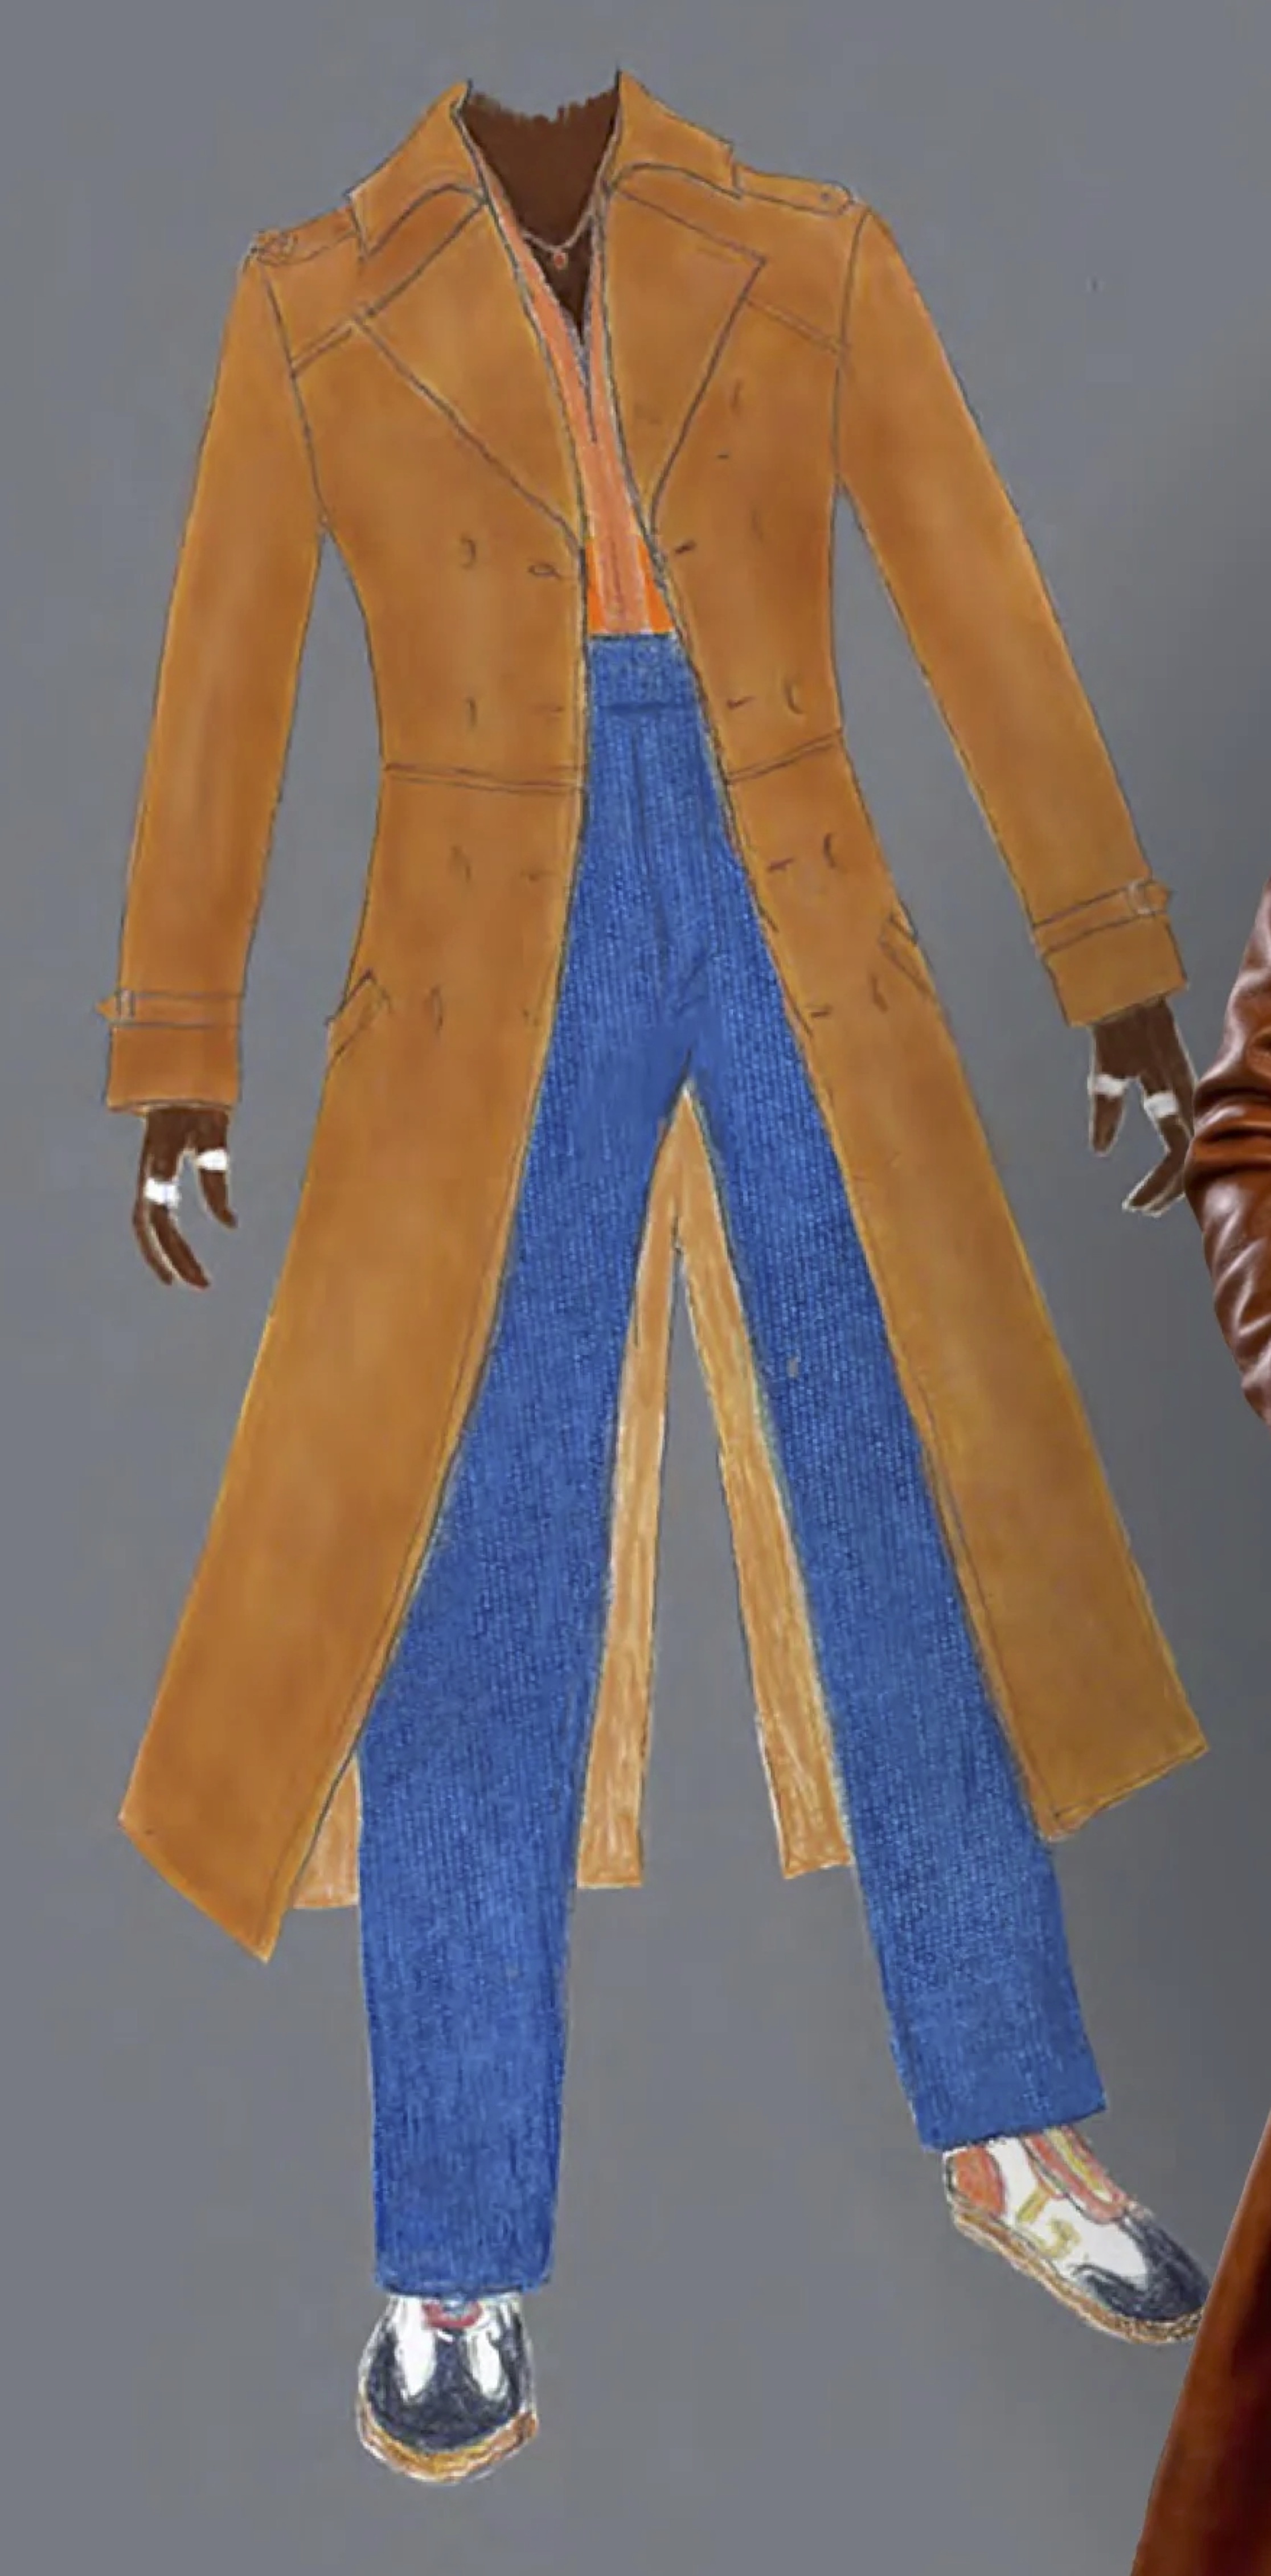 Concept art for the Fifteenth Doctor's outfit. (DWM 601)